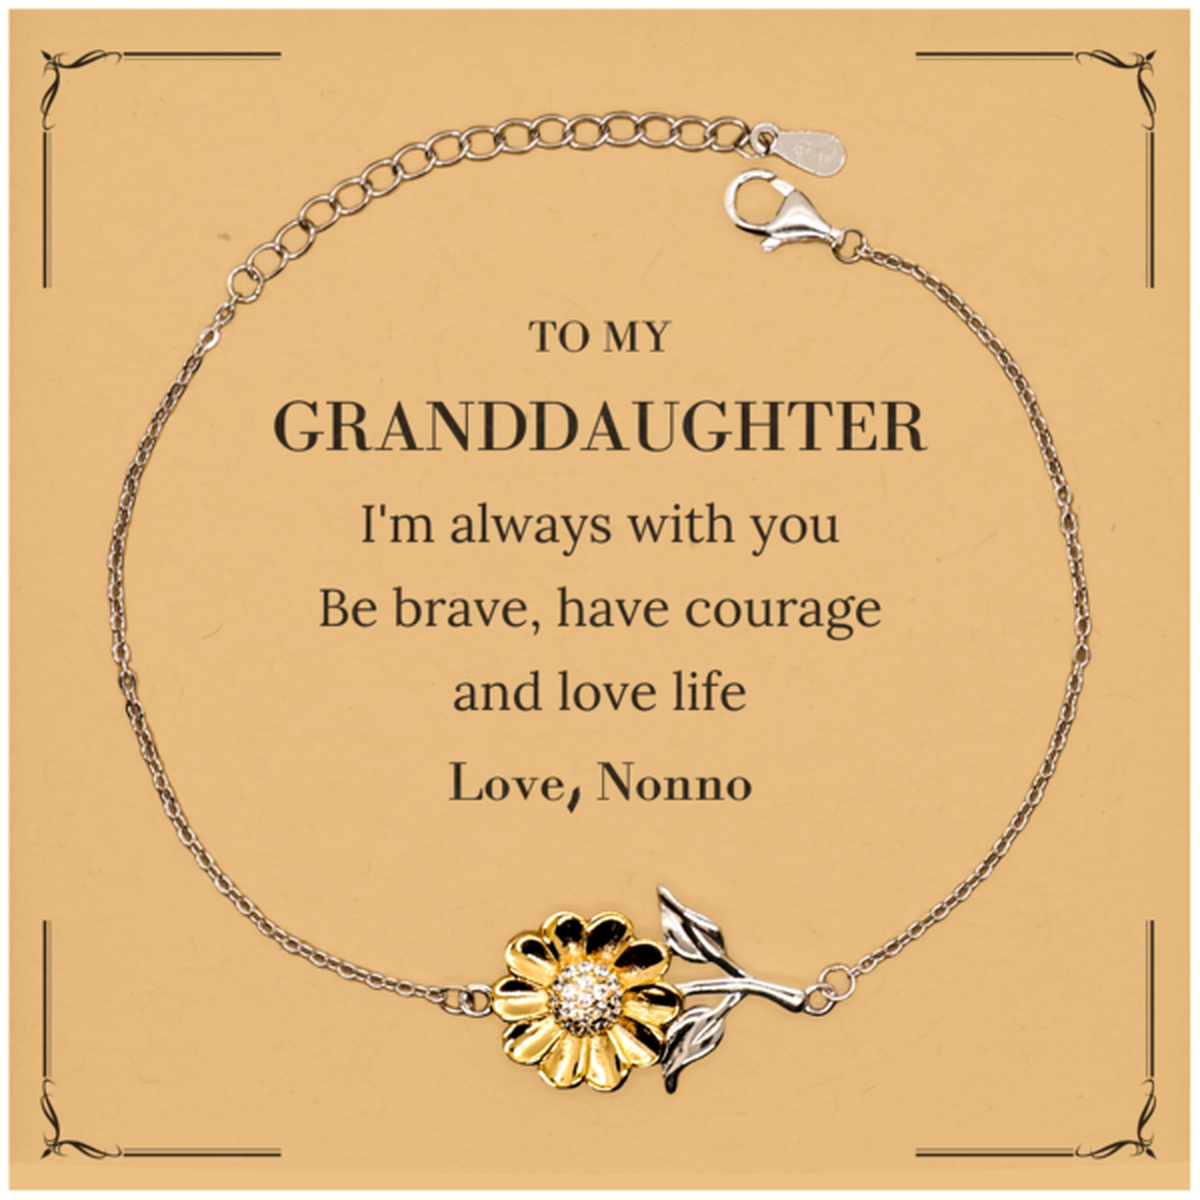 To My Granddaughter Gifts from Nonno, Unique Sunflower Bracelet Inspirational Christmas Birthday Graduation Gifts for Granddaughter I'm always with you. Be brave, have courage and love life. Love, Nonno